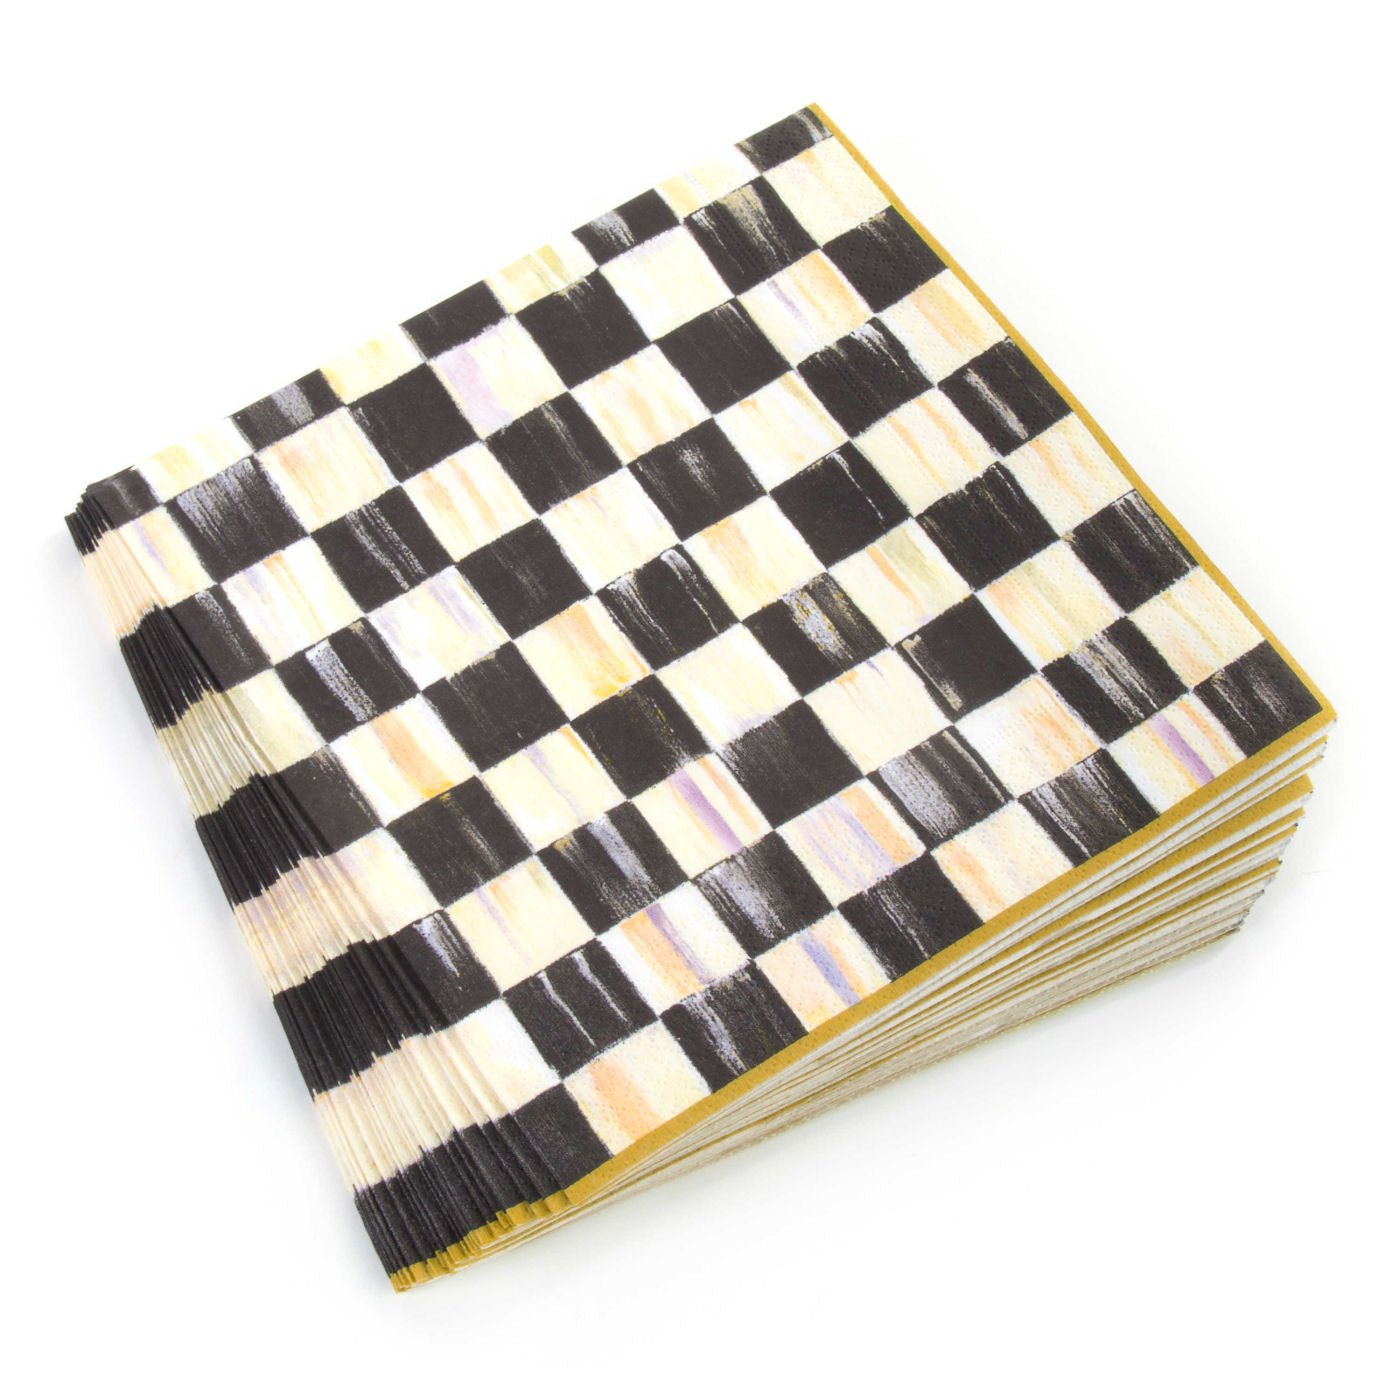 MacKenzie-Childs Courtly Check Dinner Paper Napkins - |VESIMI Design| Luxury Bathrooms and Home Decor